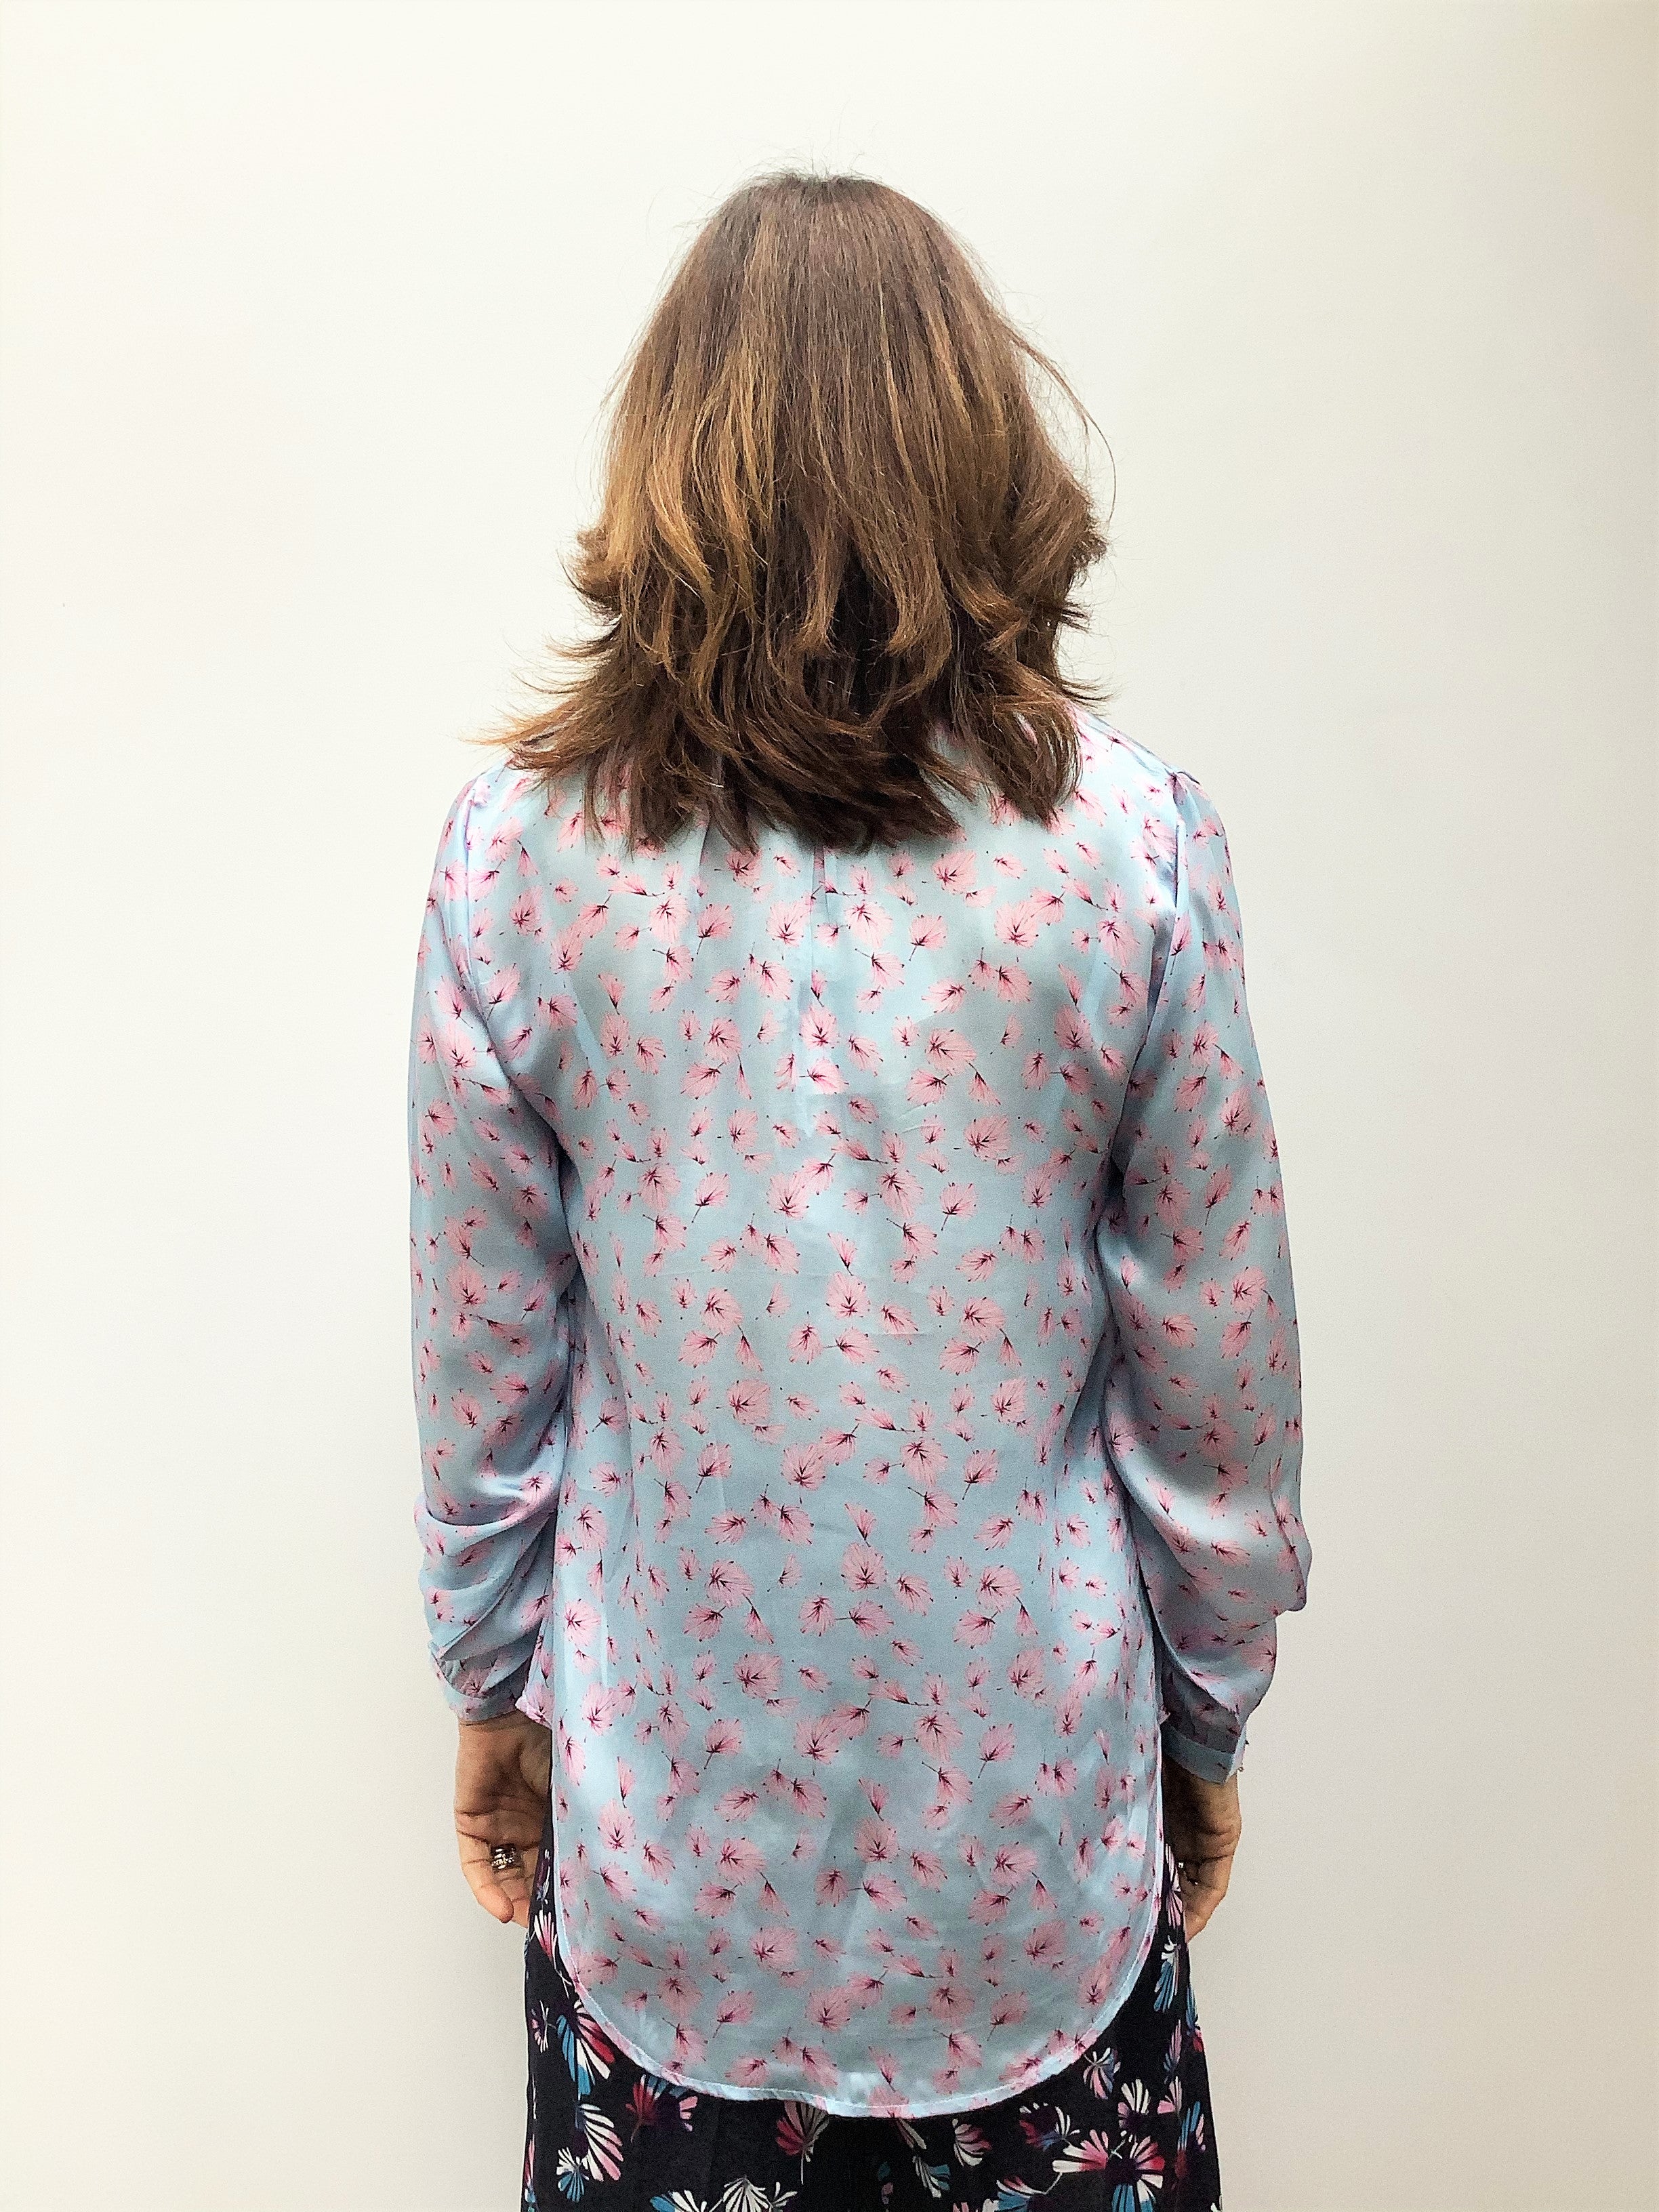 PPL Sandy Open Shirt in Mystical Leaves 02 Pink on Blue